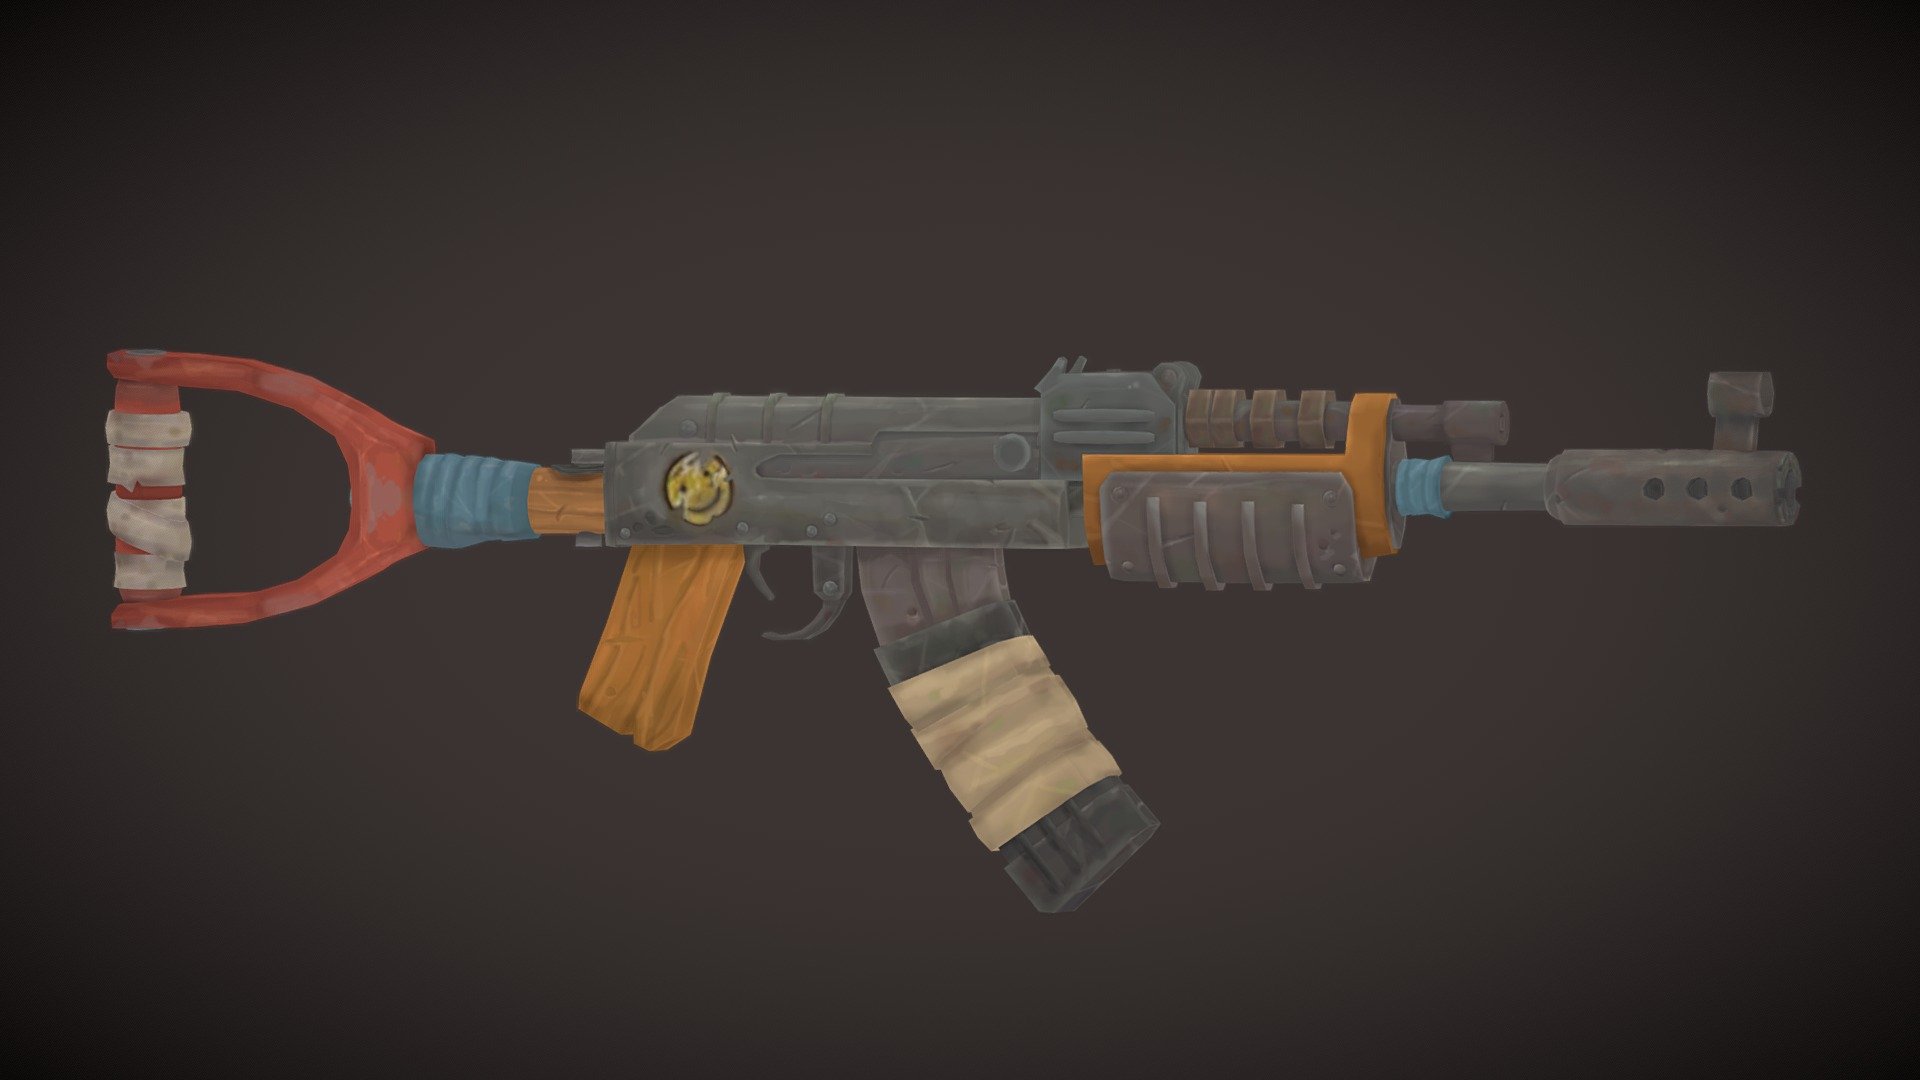 This is my latest personal project. A 3d model based an assault rifle from Rust with hand painted textures.
Include 2048x2048 and 1024x1024 textures also included fbx,obj and 
collada format.
Geometry
Triangles 697
Quads 3.5k
Total triangles 7.7k
Made ith blender.

Buy and enjoy! 3d model